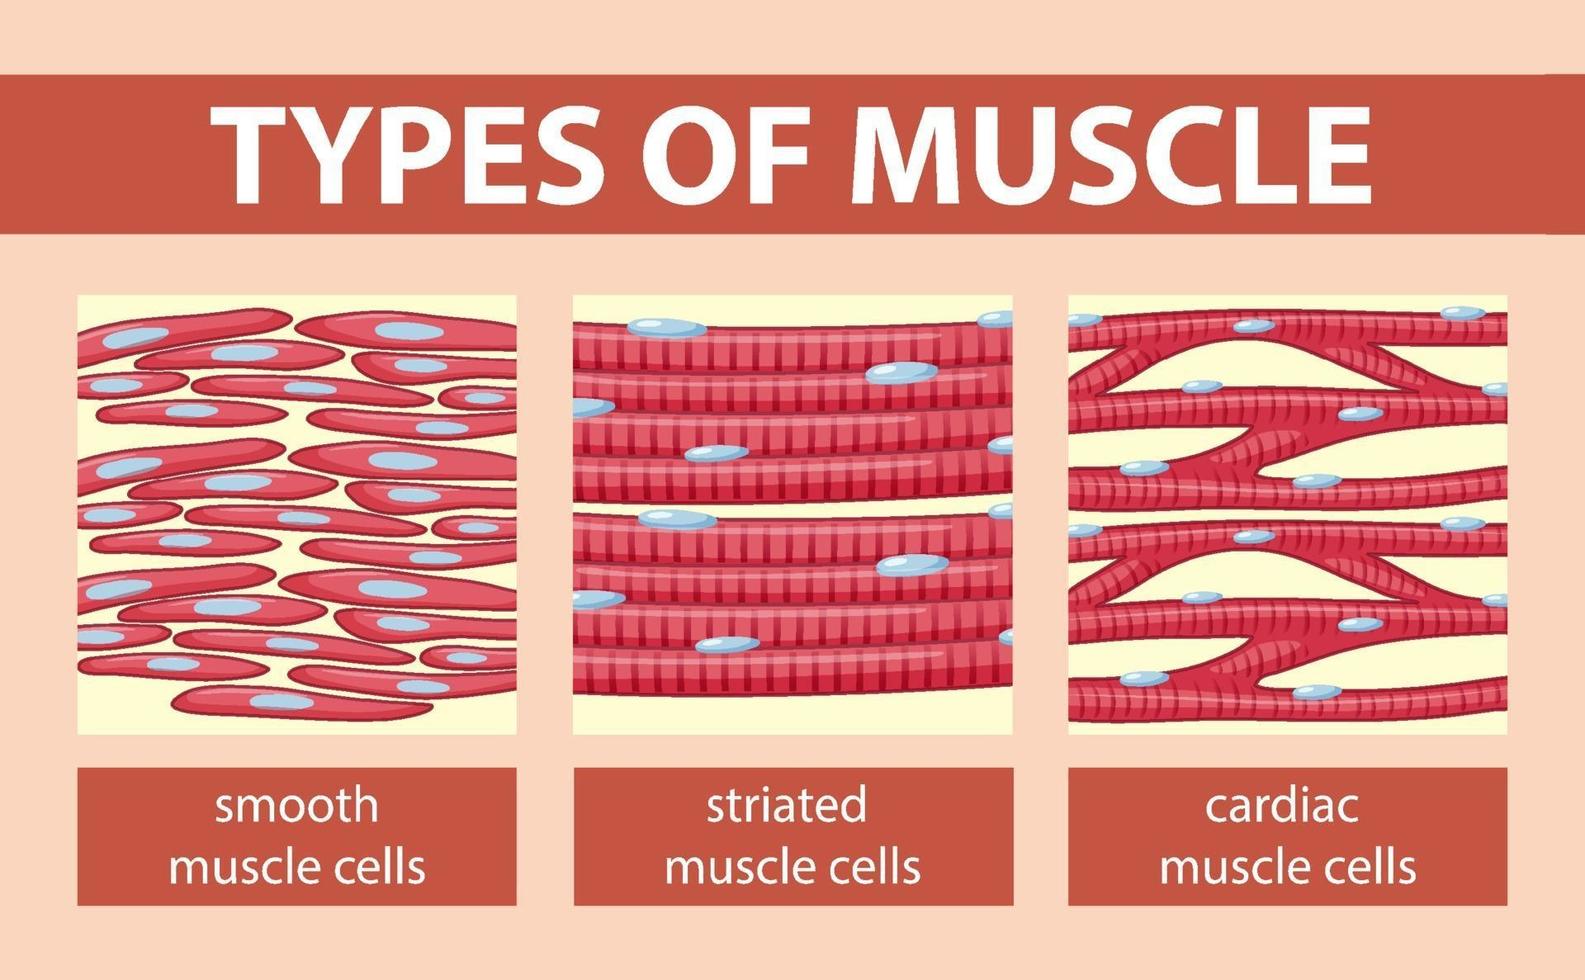 Types of muscle cell diagram vector